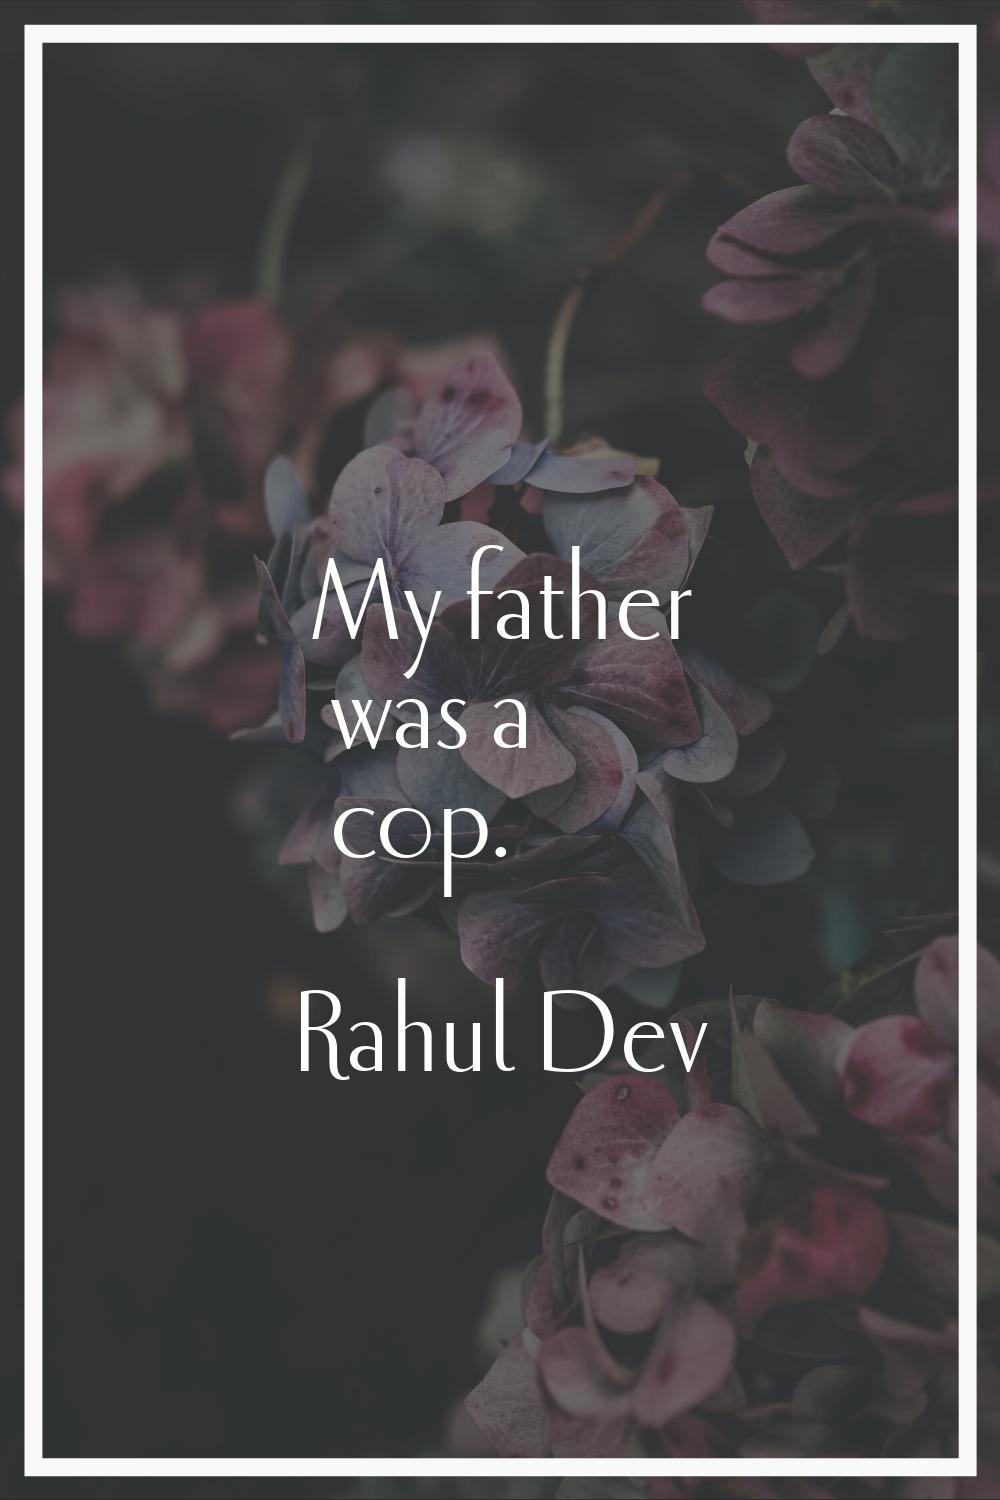 My father was a cop.